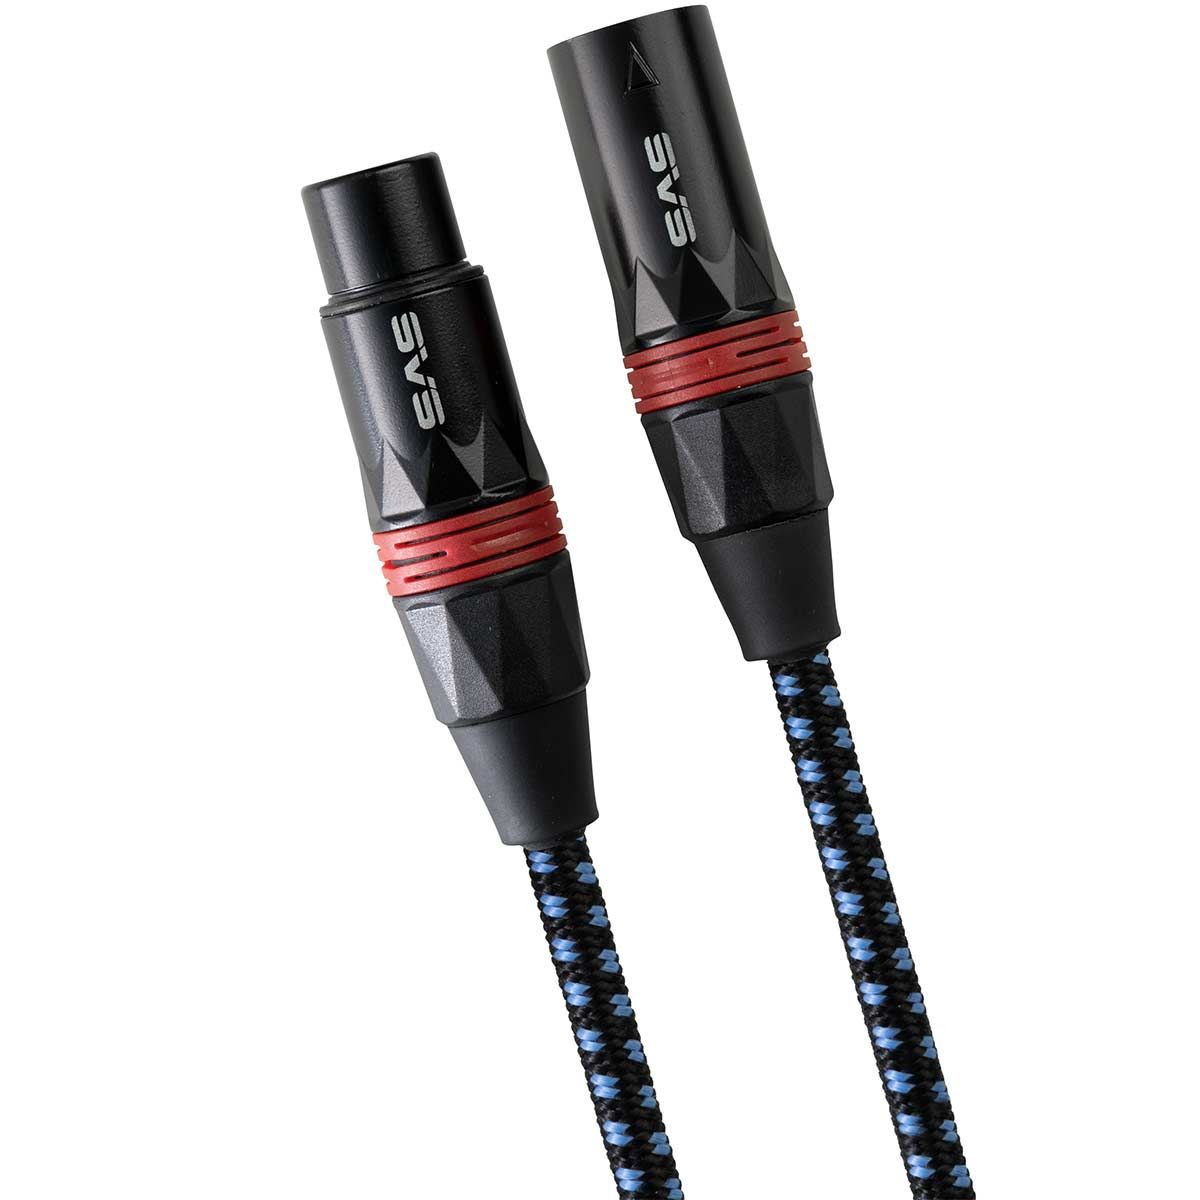 SVS SoundPath XLR Balanced XLR Audio Cable - Each - red cable terminations